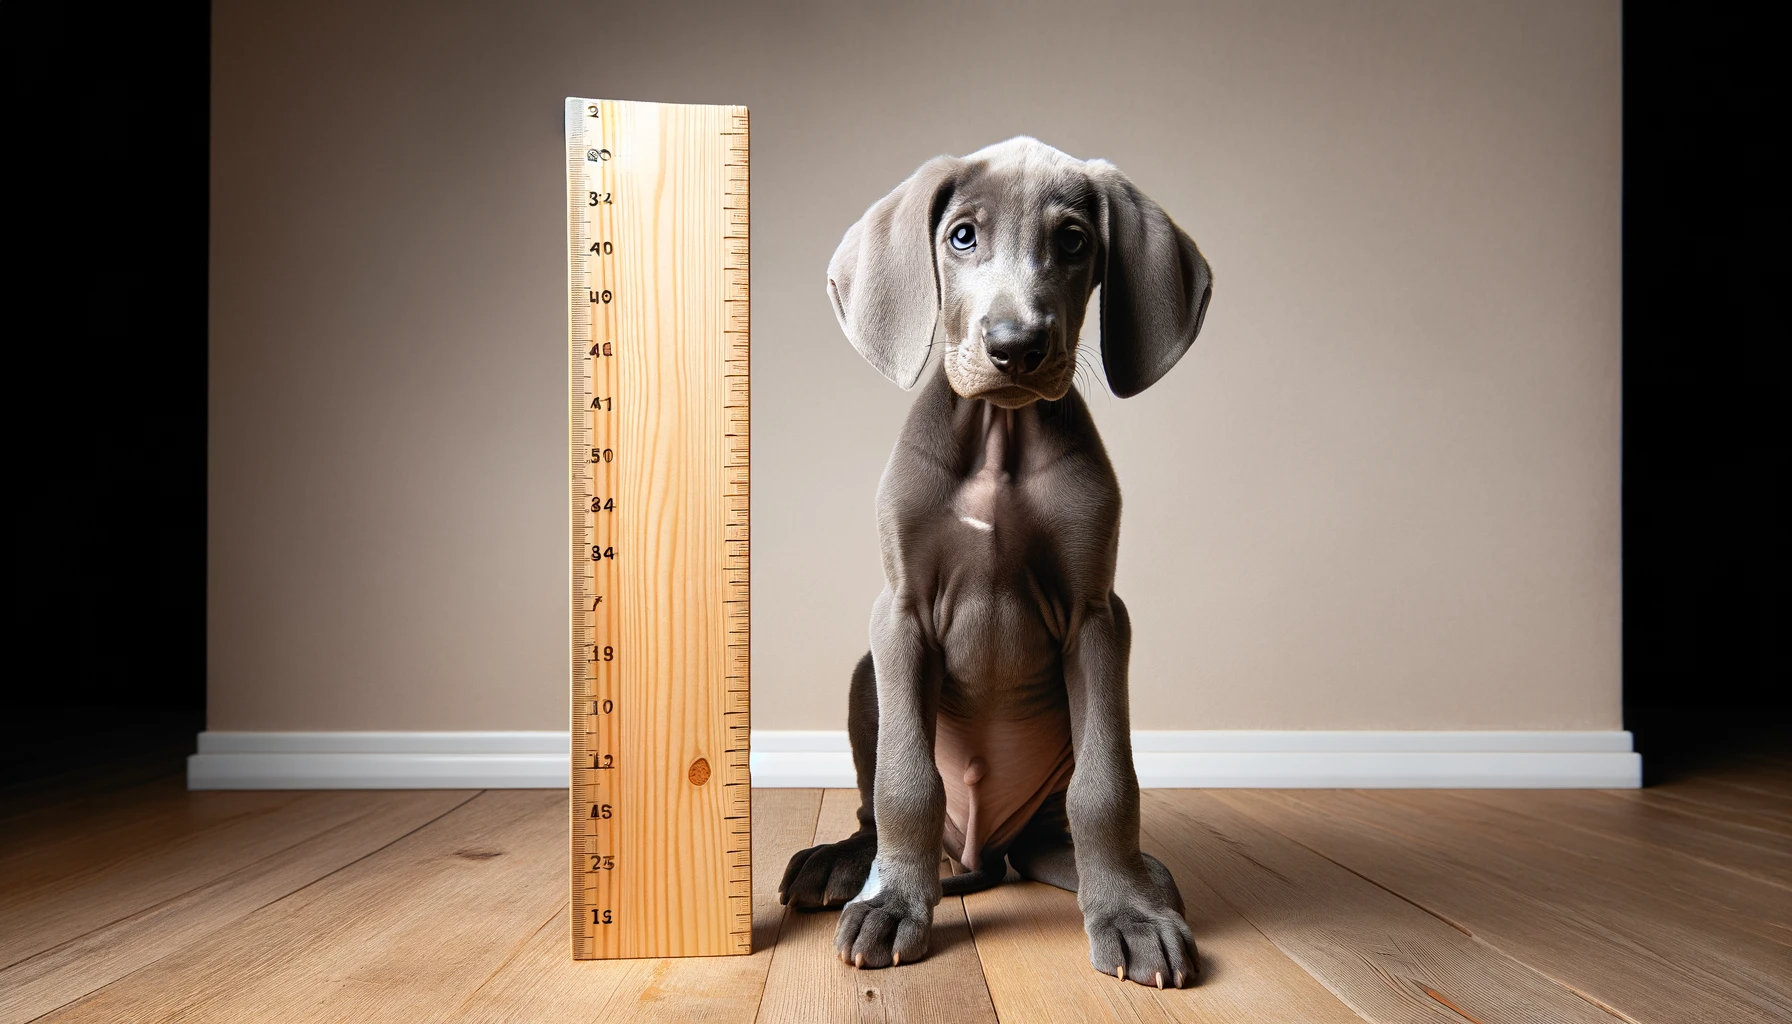 Greyador standing next to a ruler for size comparison